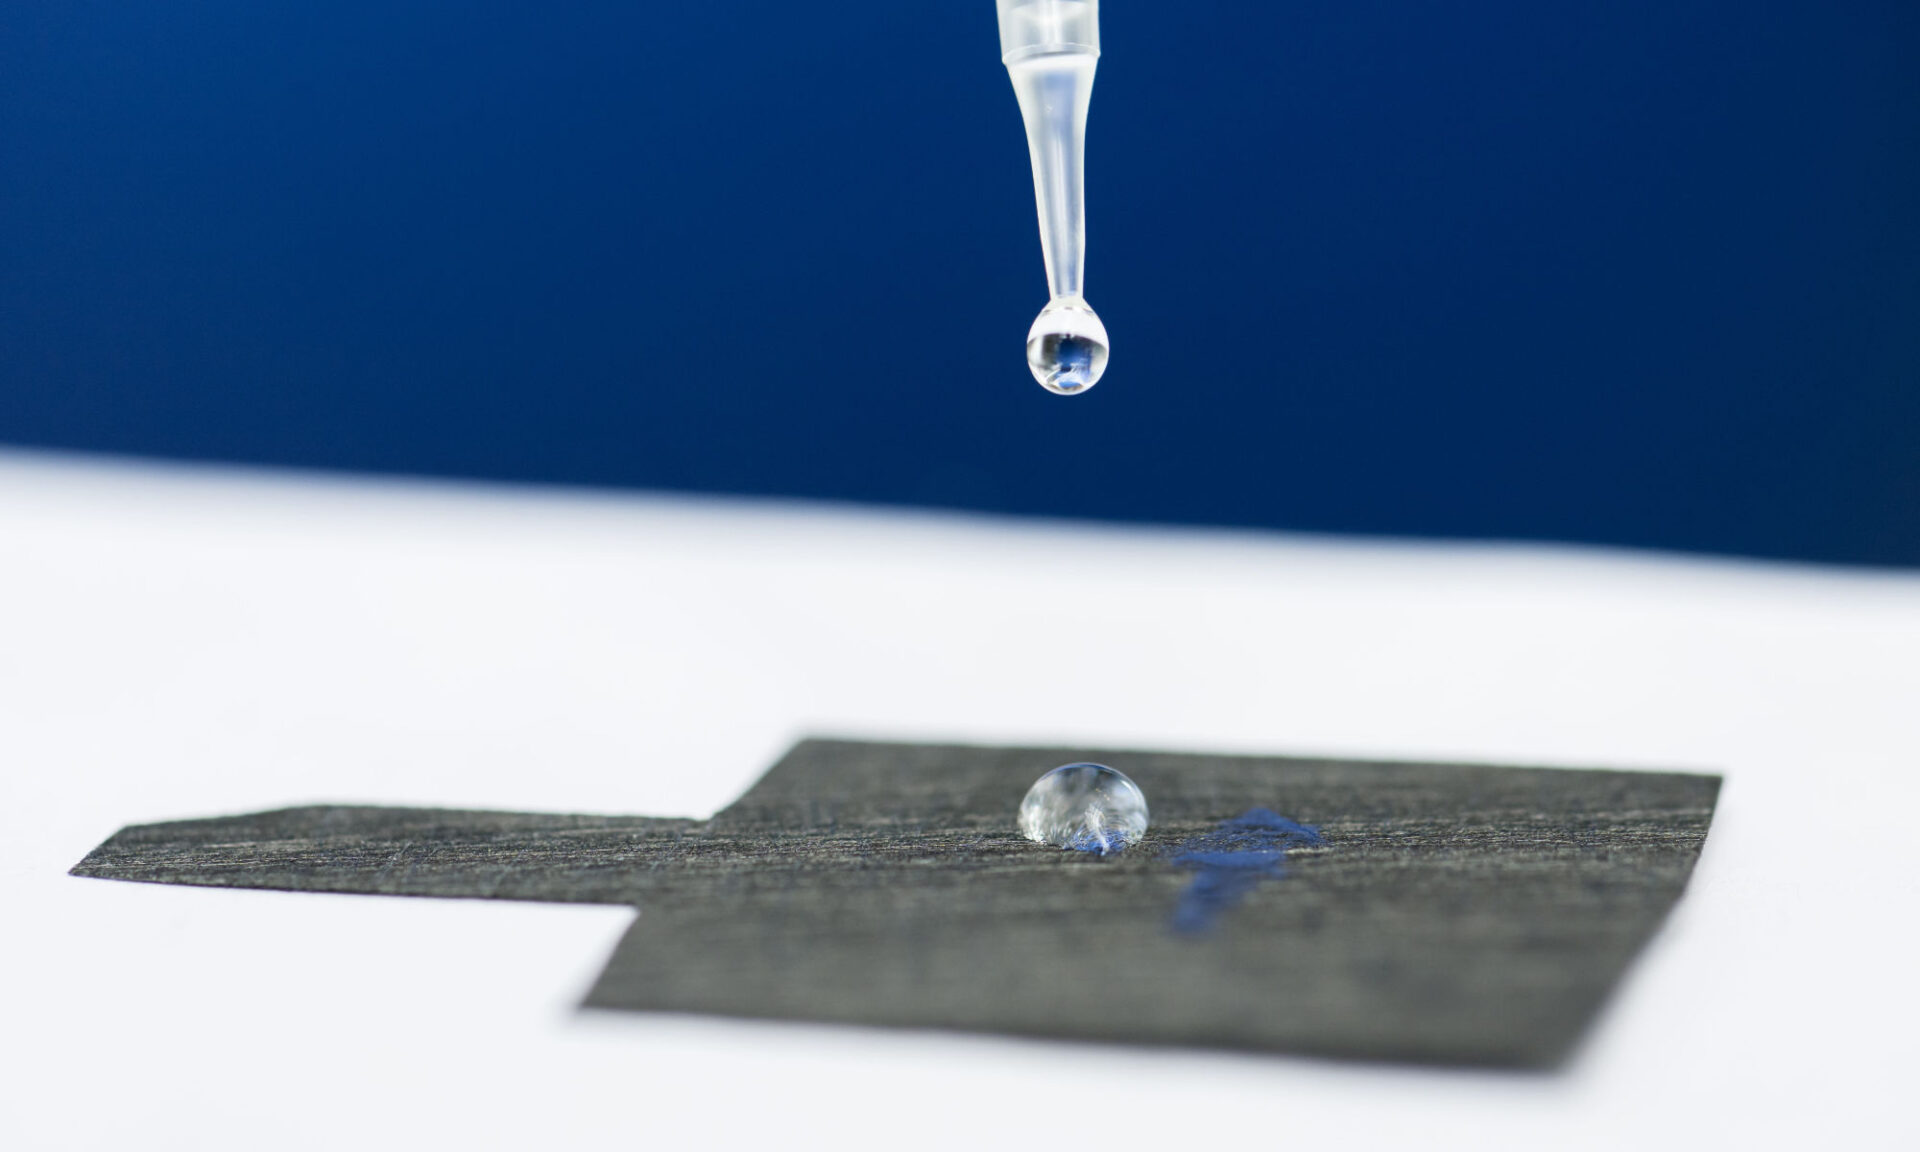 Pipette releasing a water droplet atop carbon paper to illustrate the remediation of pfas forever chemicals.